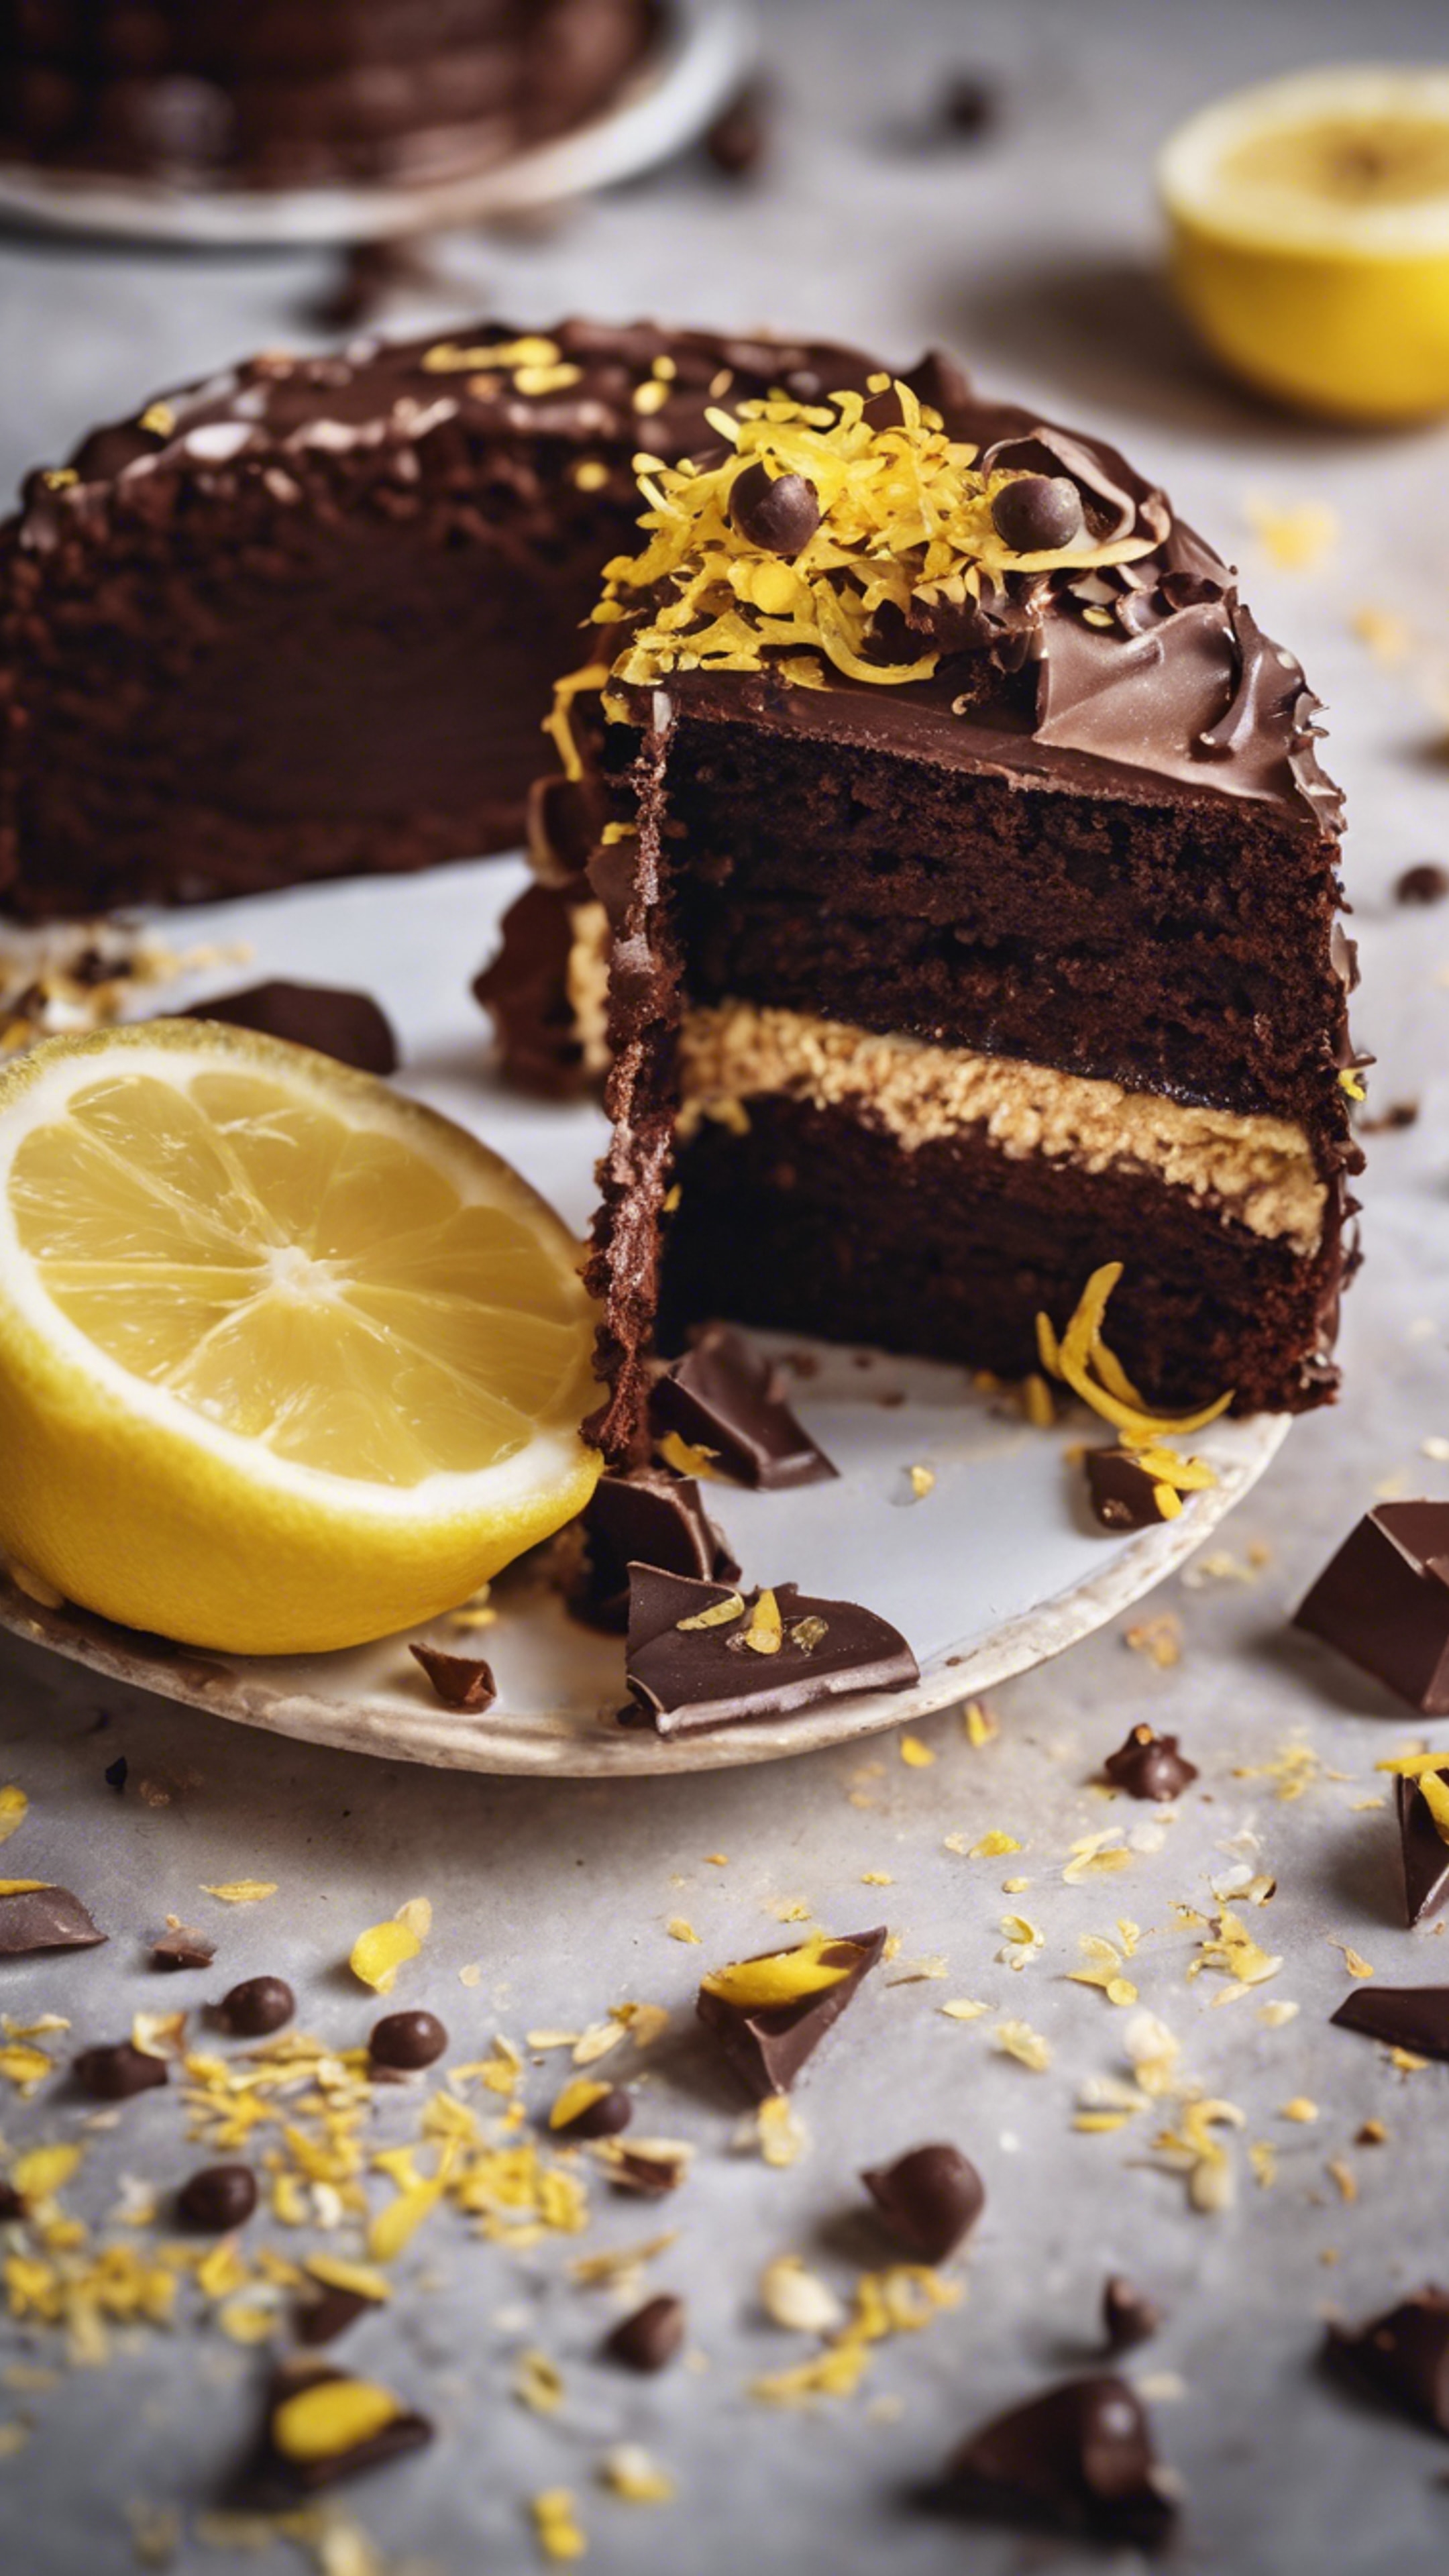 A slice of rich chocolate cake with yellow lemon zest sprinkled on top. Tapet[a5c73c6ece1941b4ba95]